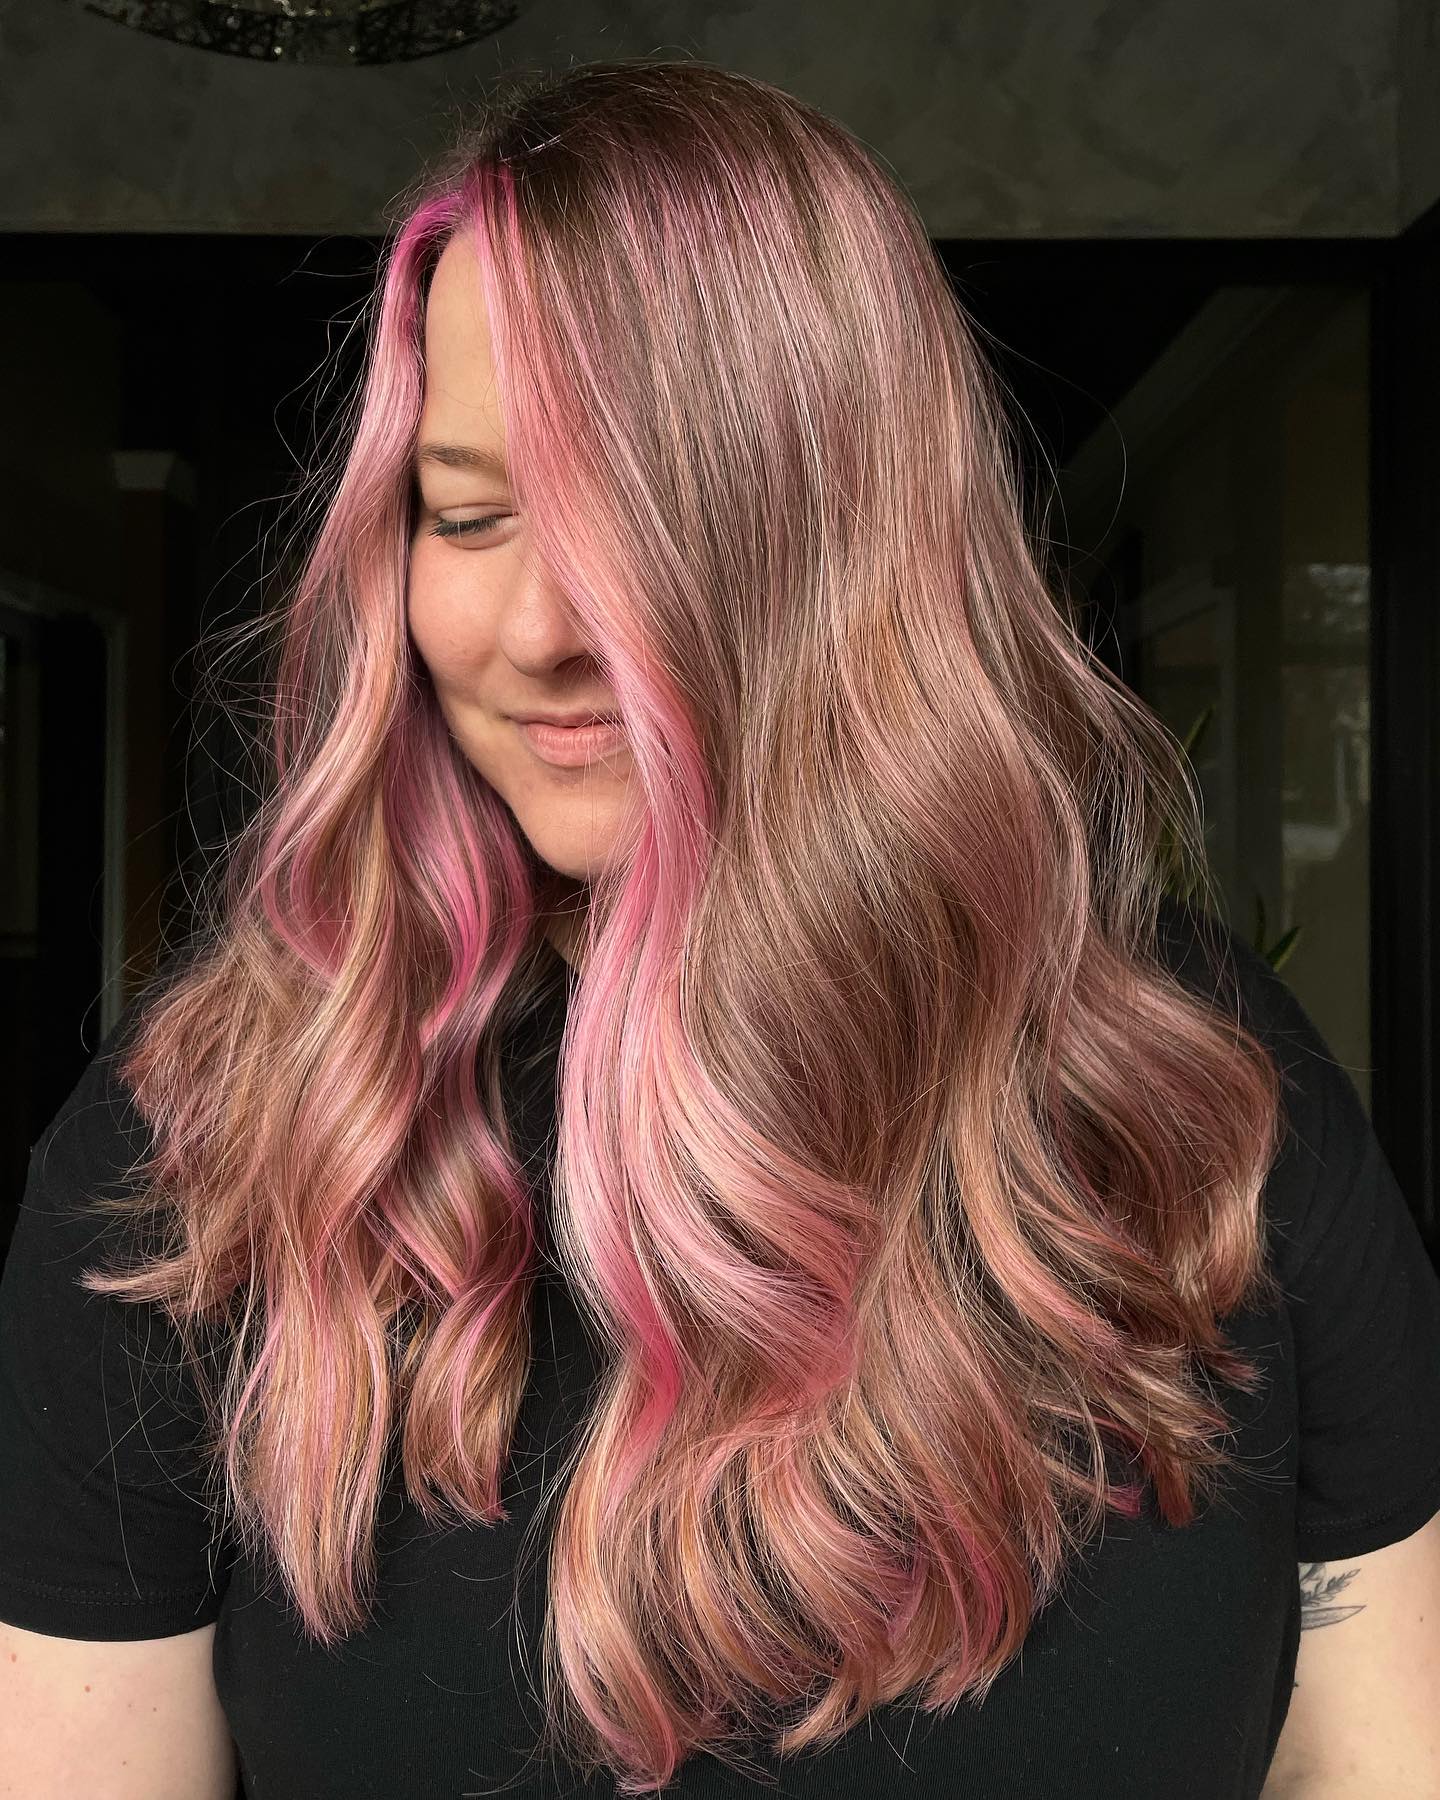 Strawberry Pink Highlights on Long Blonde Hair